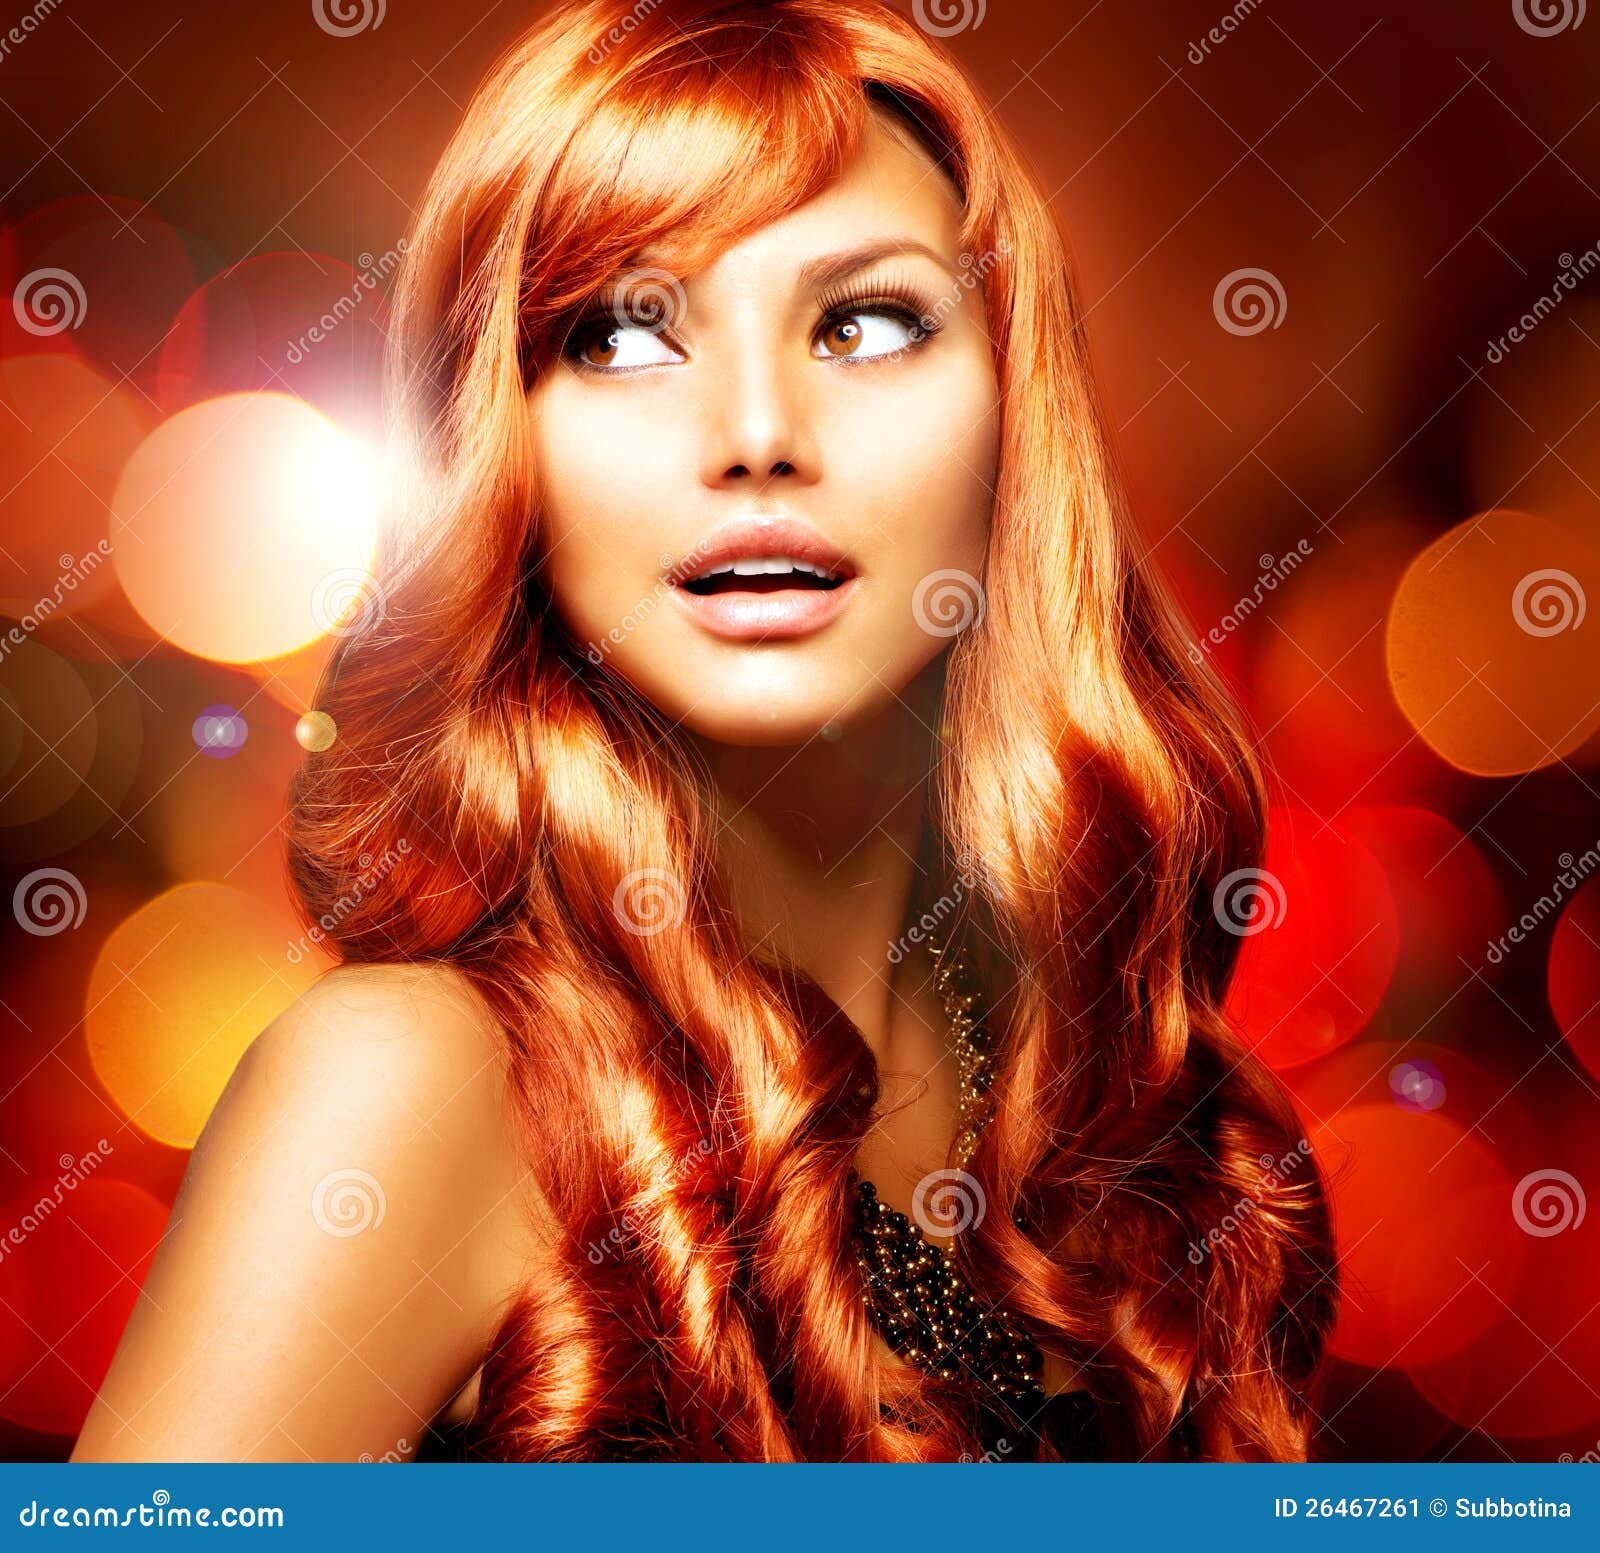 Beautiful Girl With Red Hair Stock Image - Image: 26467261